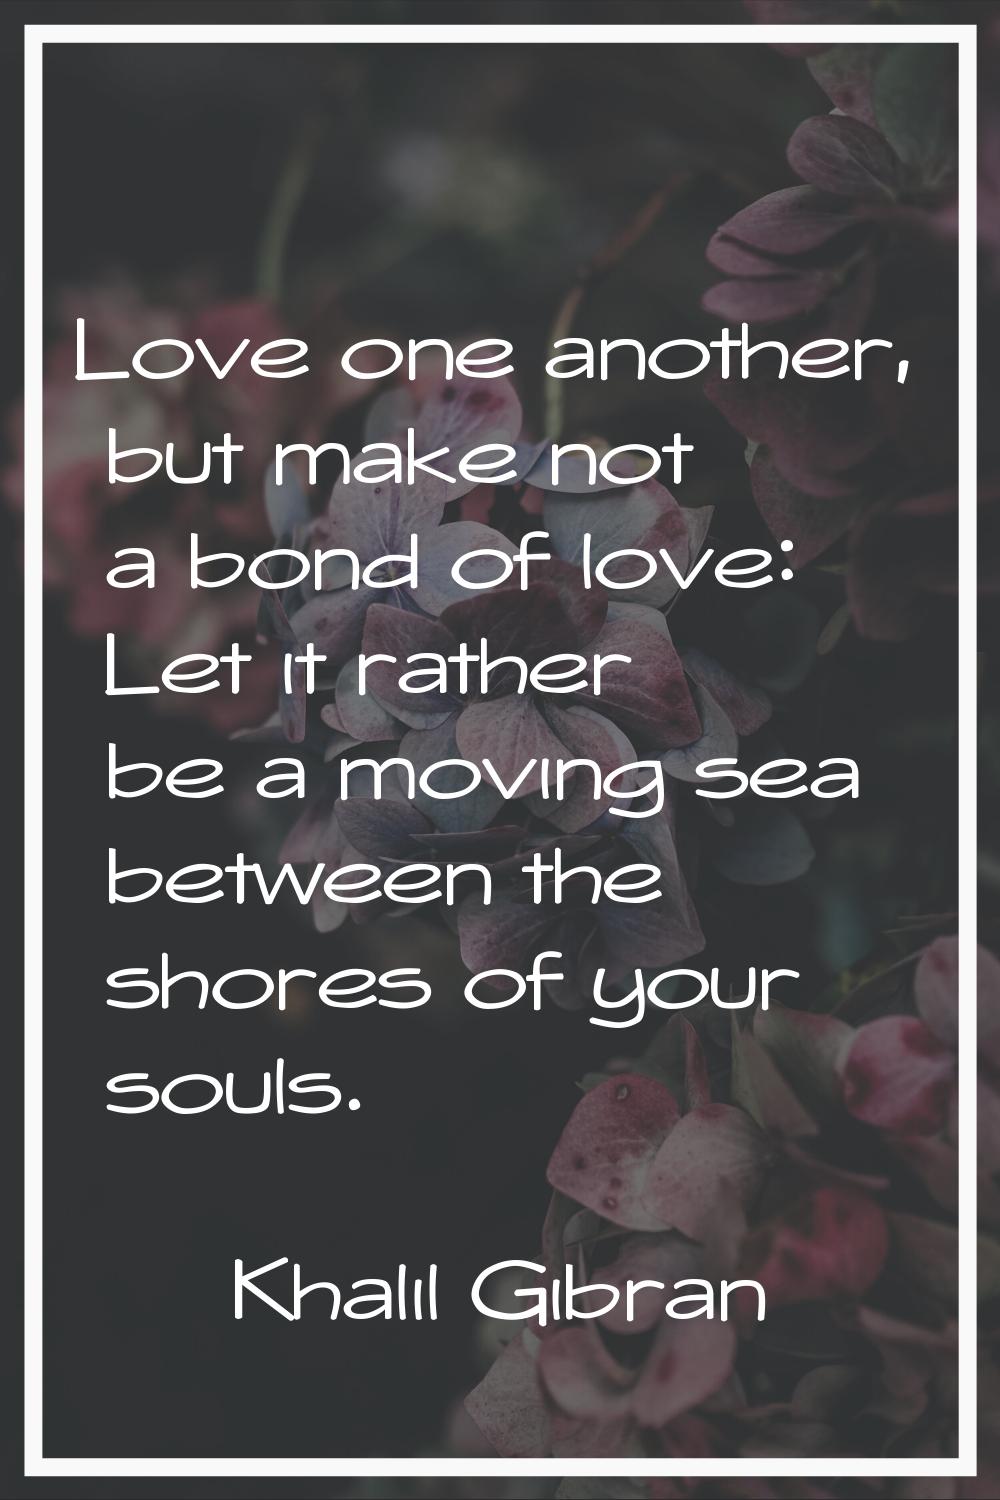 Love one another, but make not a bond of love: Let it rather be a moving sea between the shores of 